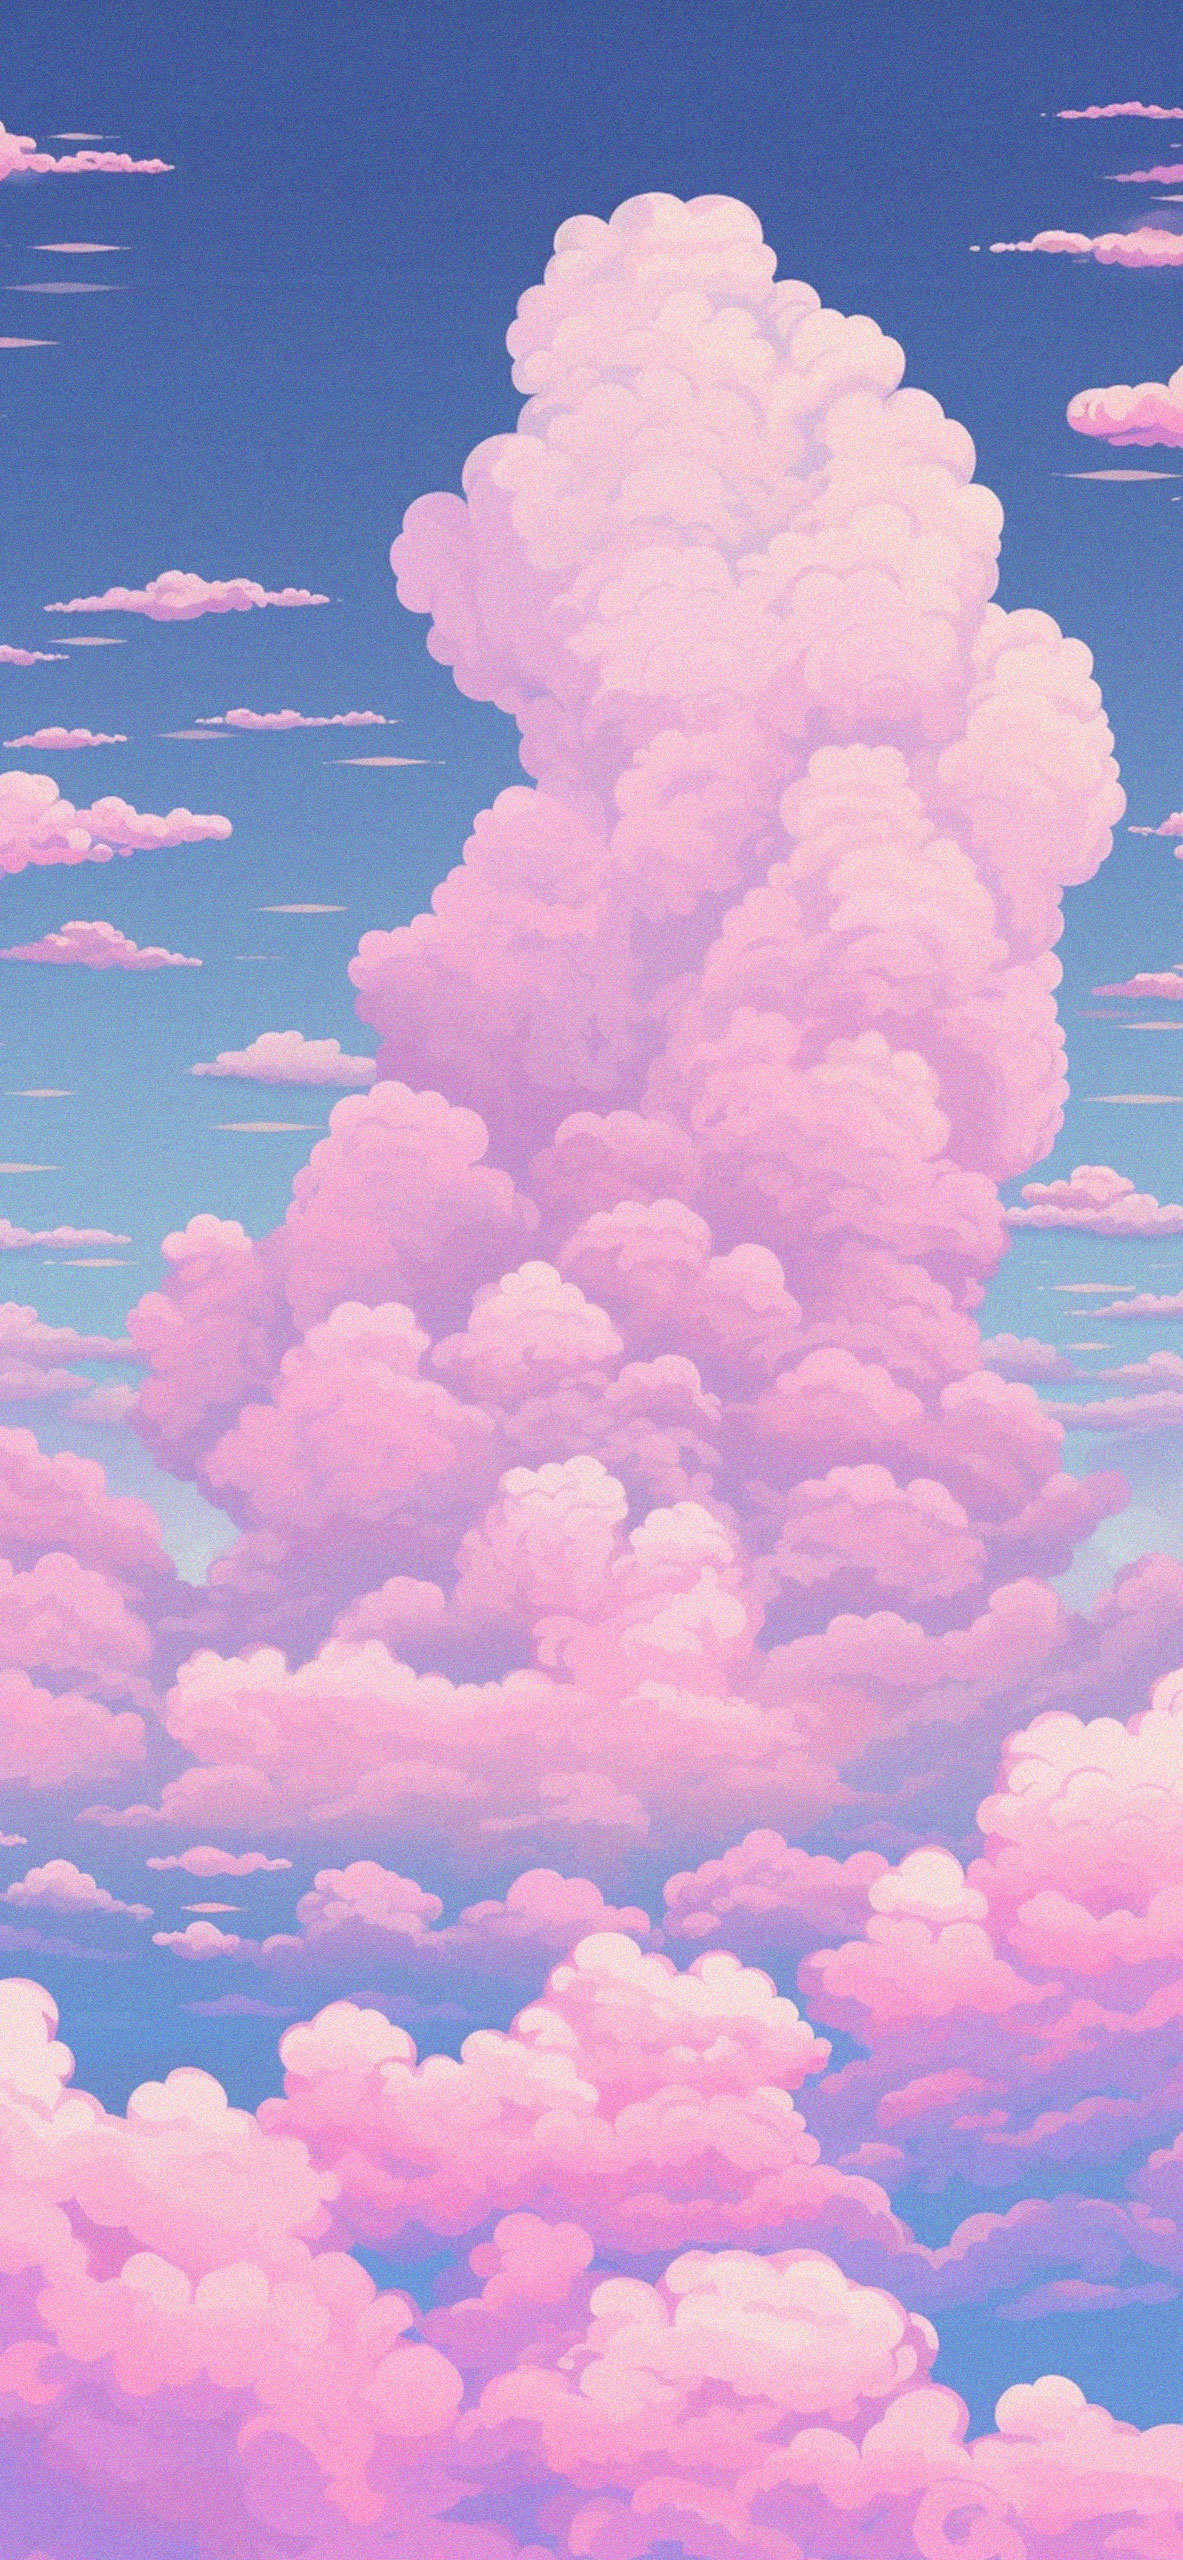 Blue Sky with Pink Clouds Background - High-quality Free Backgrounds